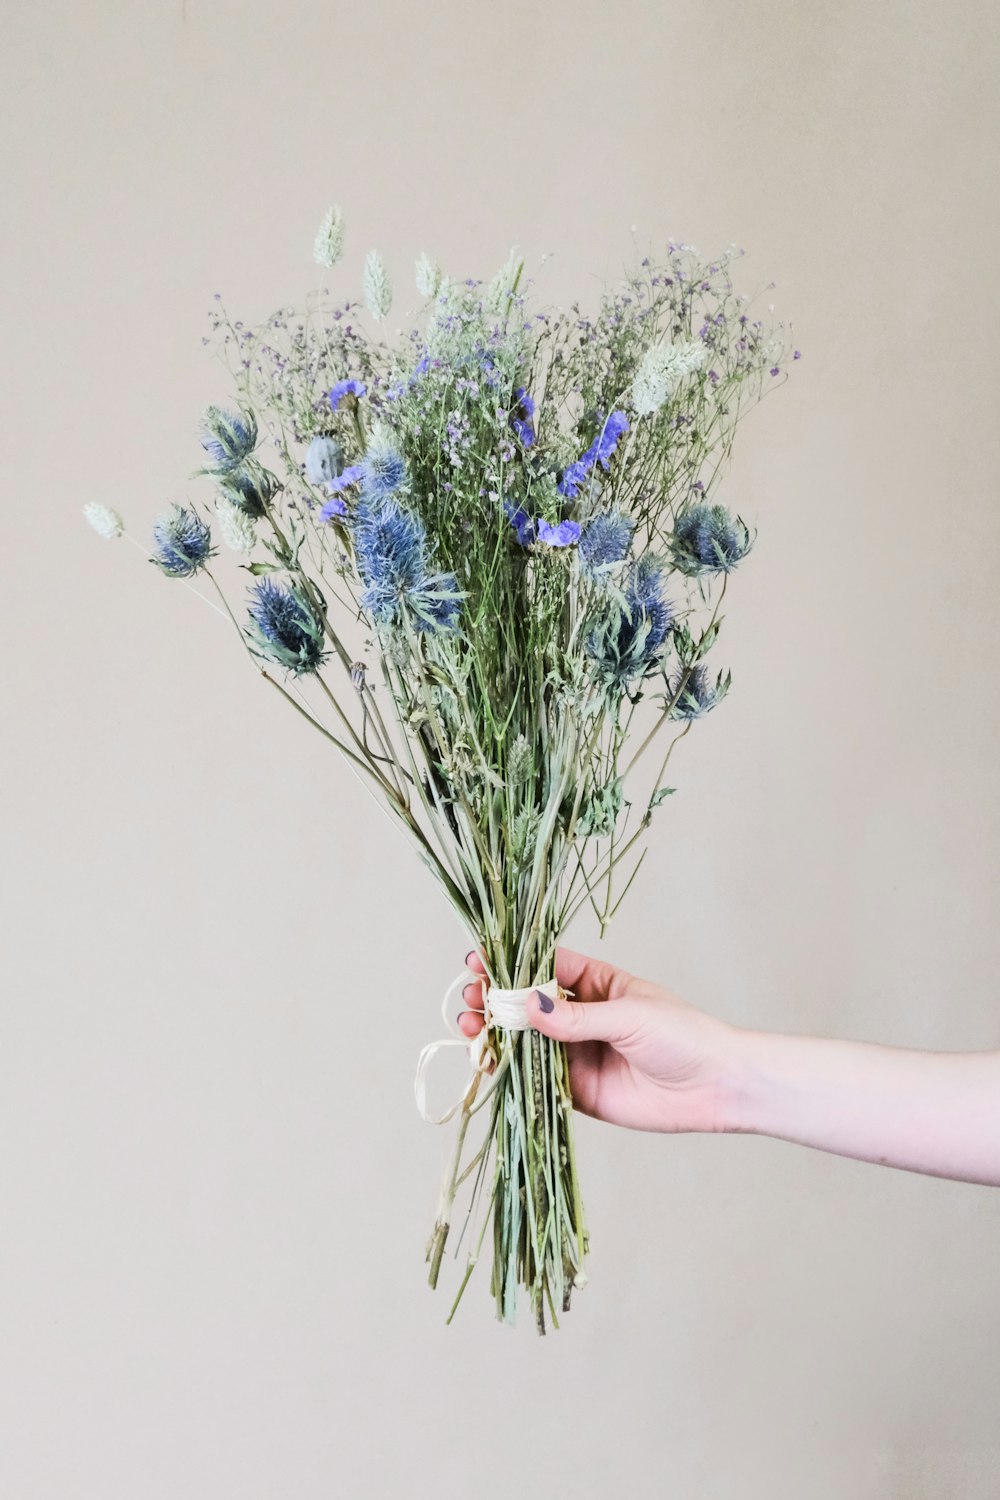 person holding blue and white flowers